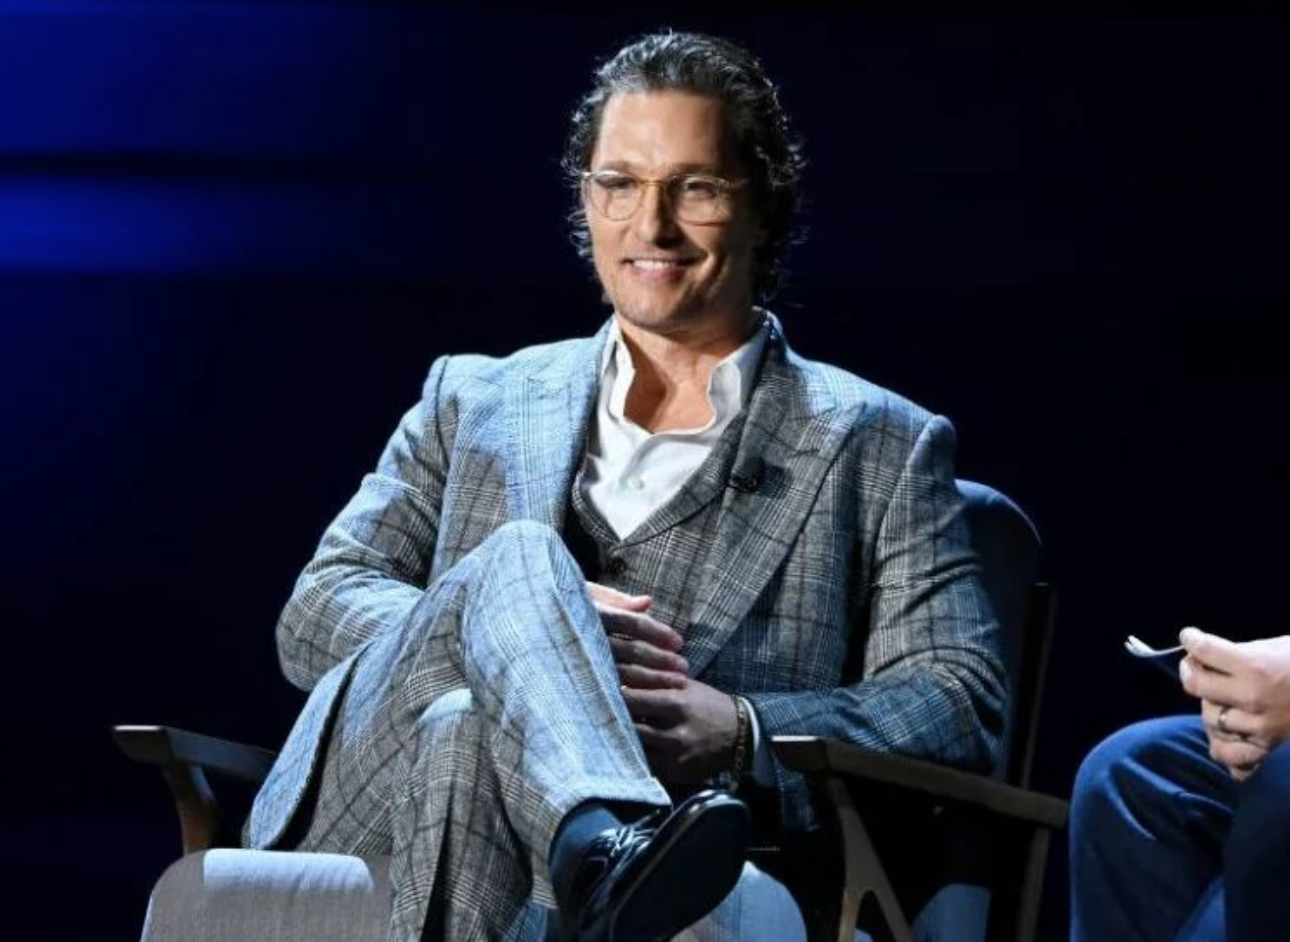 Matthew McConaughey Just Got Major Endorsement For Governor From Ted Cruz (Asking Him Not to Run), Alright Alright!